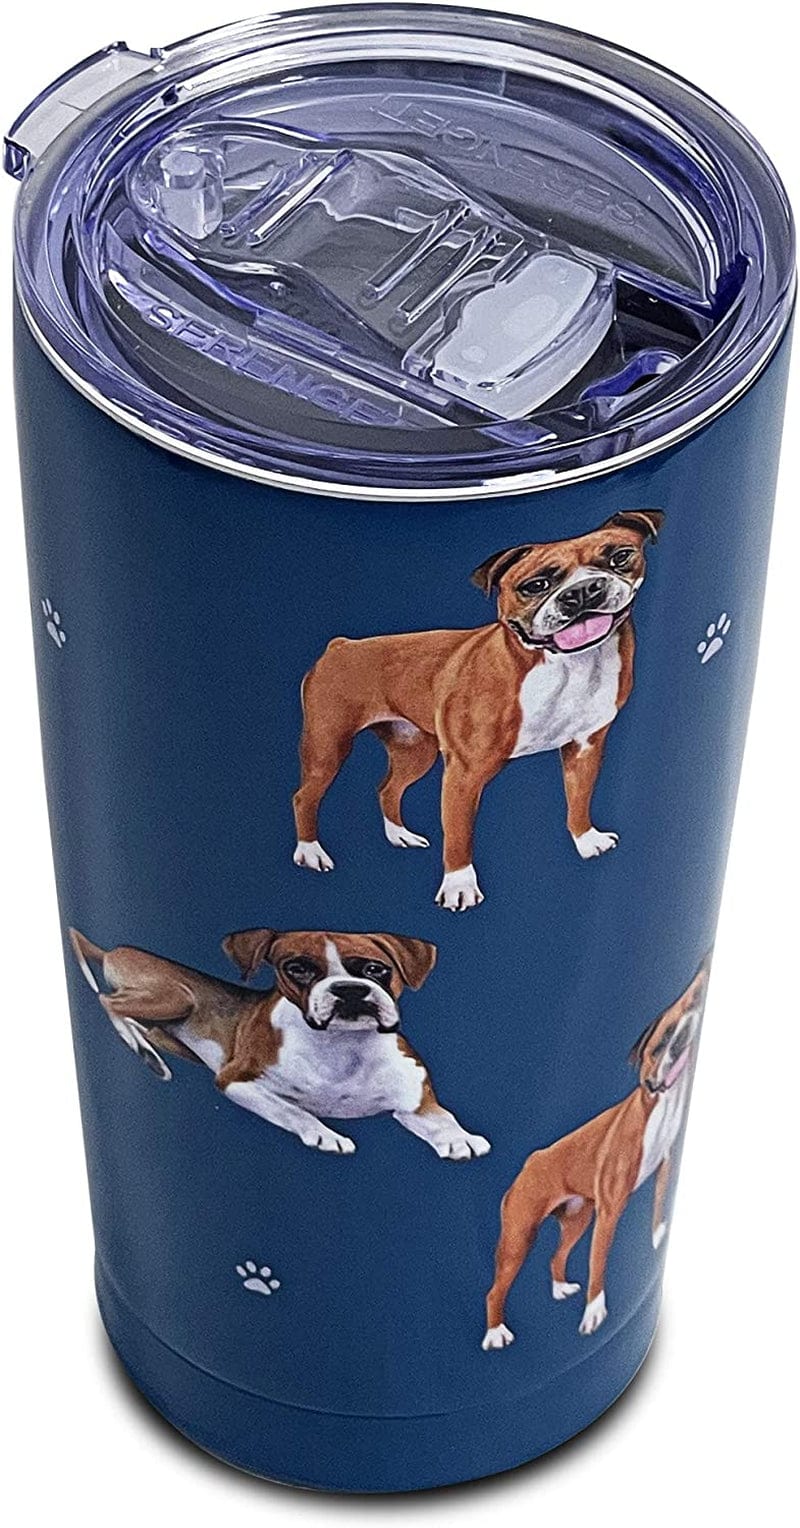 Australian Shepherd SERENGETI 16 Oz. Stainless Steel, Vacuum Insulated Tumbler with Spill Proof Lid - 3D Print - Insulated Travel Mug for Hot or Cold Drinks (Australian Shepherd Tumbler) Home & Garden > Kitchen & Dining > Tableware > Drinkware SERENGETI Boxer Tumbler  